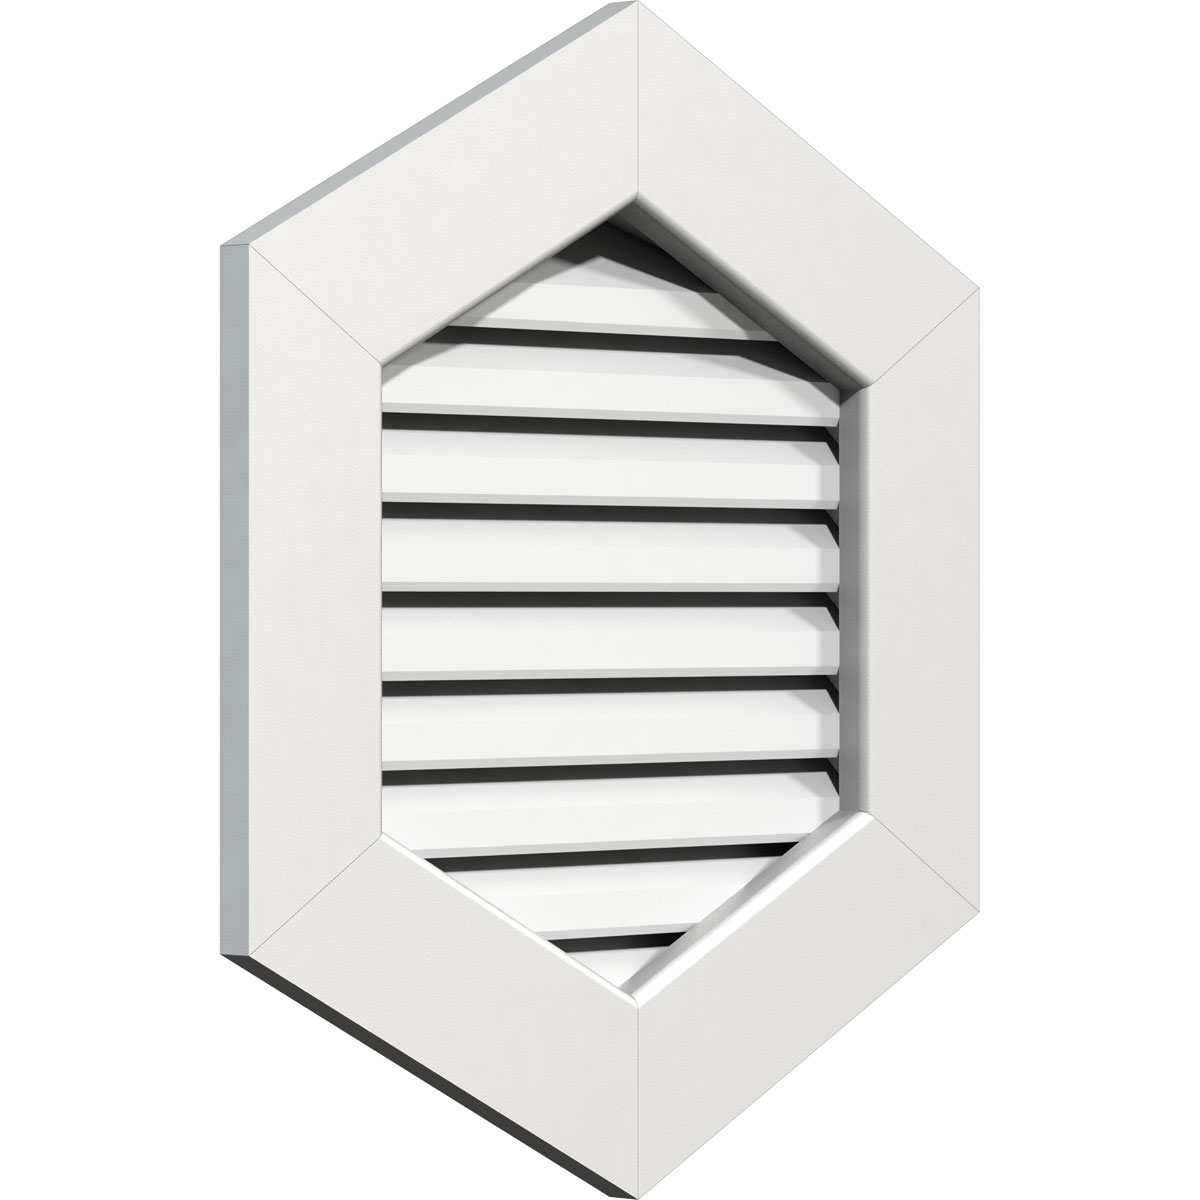 Ekena Millwork 30"W x 36"H Vertical Peaked Gable Vent (35"W x 40 3/4"H Frame Size) 4/12 Pitch: Functional, PVC Gable Vent w/ 1" x 4" Flat Trim Frame - image 2 of 13